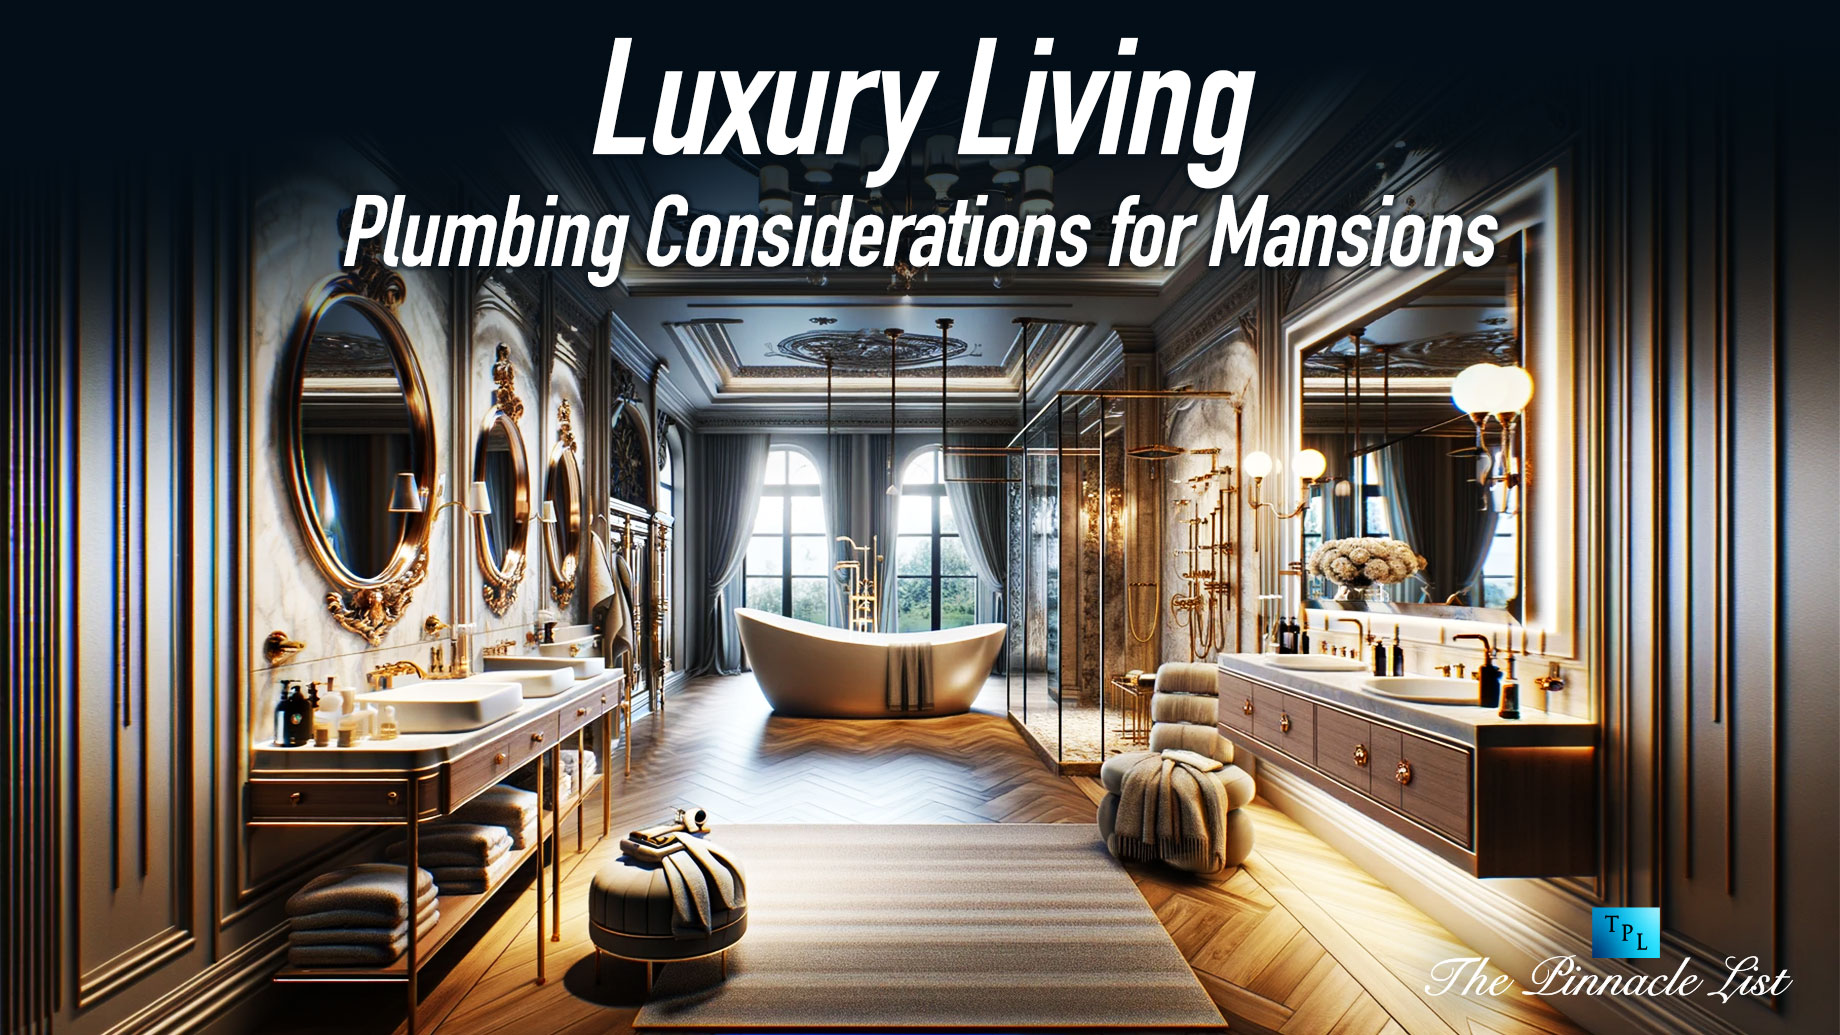 Luxury Living: Plumbing Considerations for Mansions